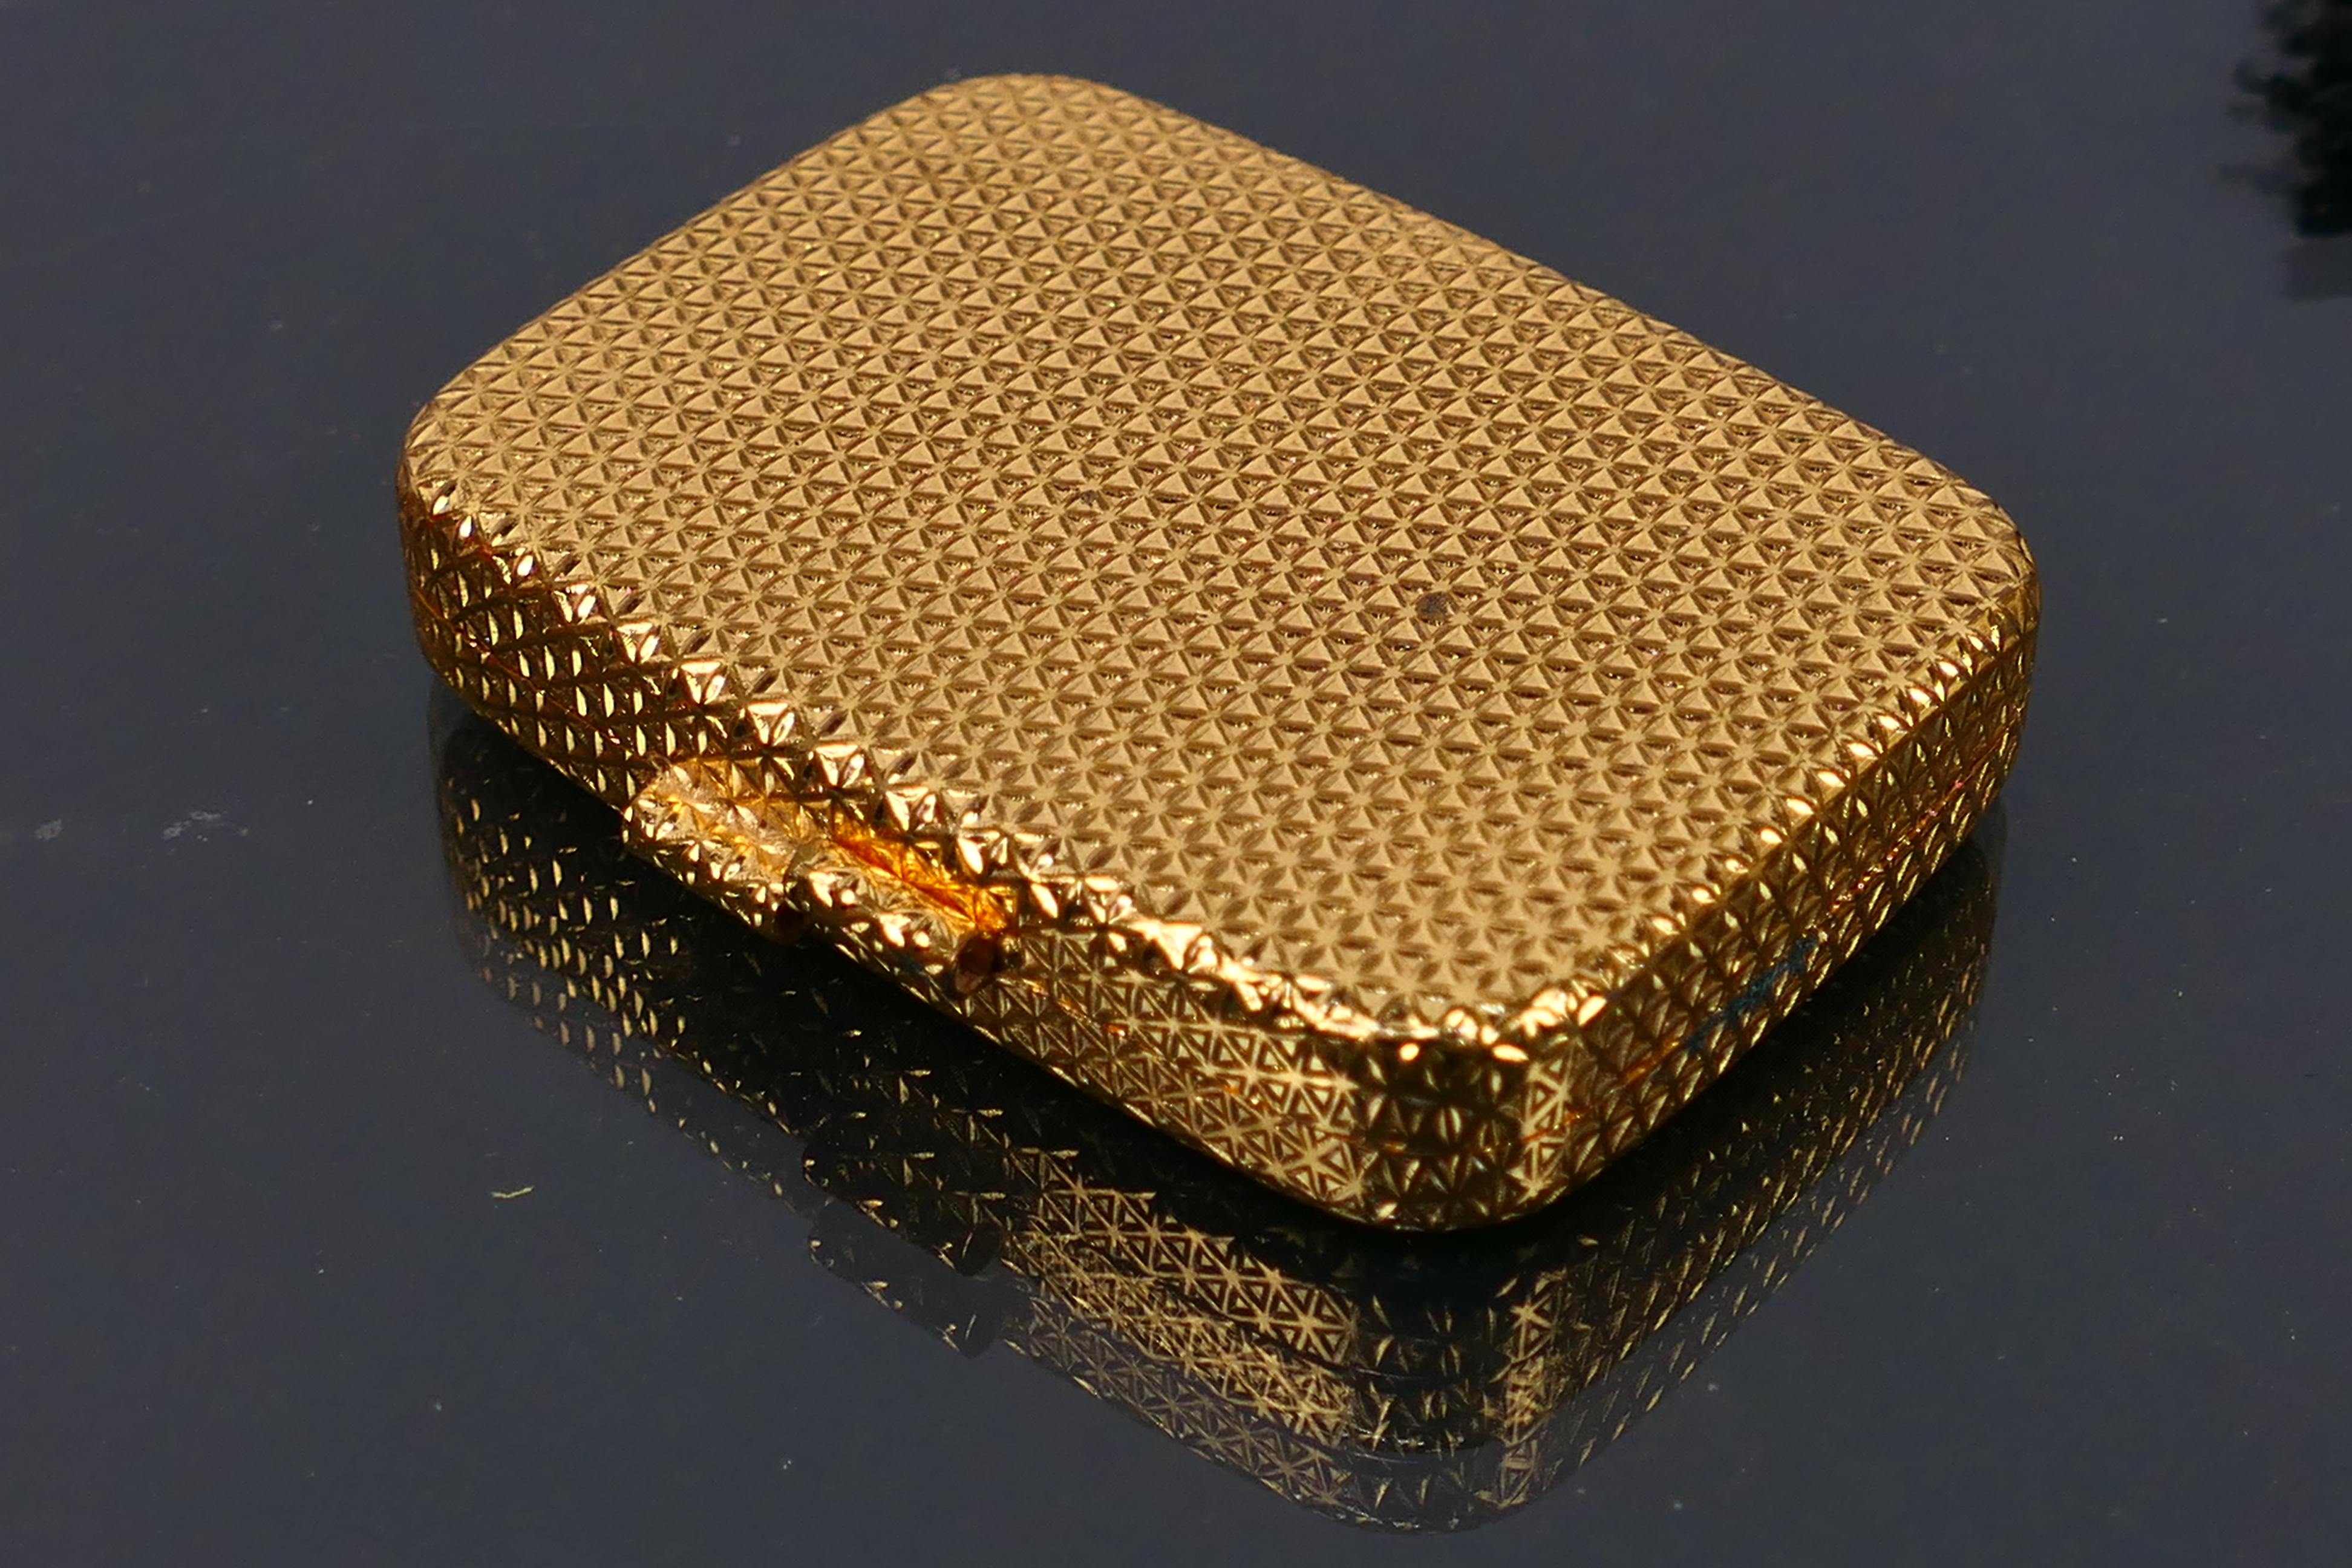 Estee Lauder - Revlon - A vintage Estee Lauder Honey Glow compact with a mother of pearl style - Image 5 of 9